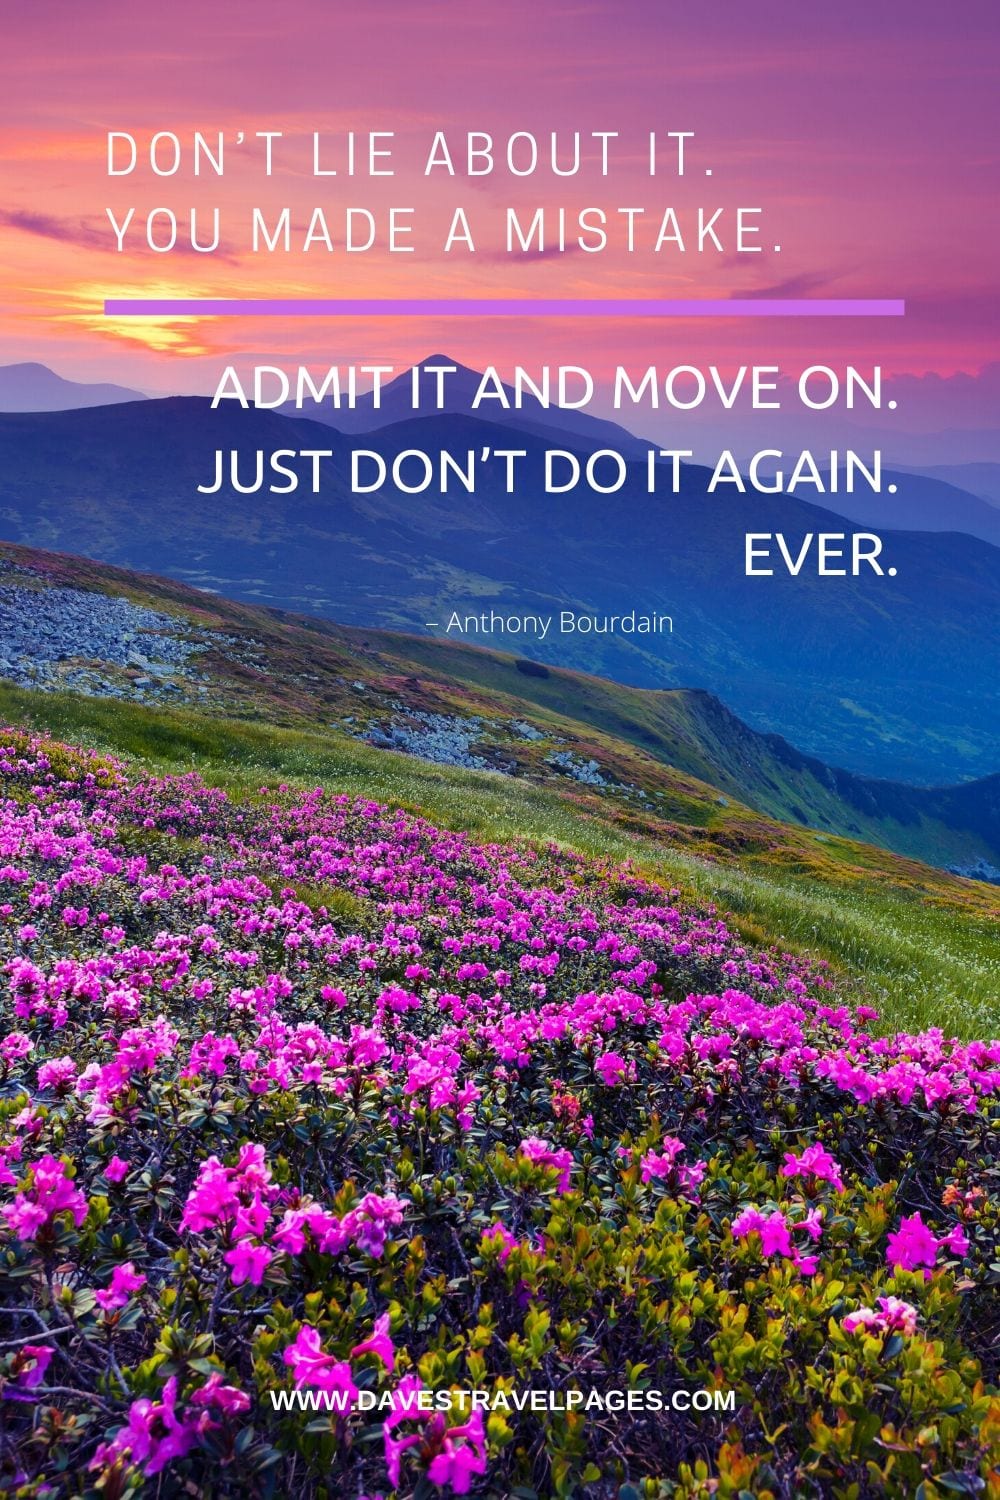 “Don’t lie about it. You made a mistake. Admit it and move on. Just don’t do it again. Ever.” – Anthony Bourdain